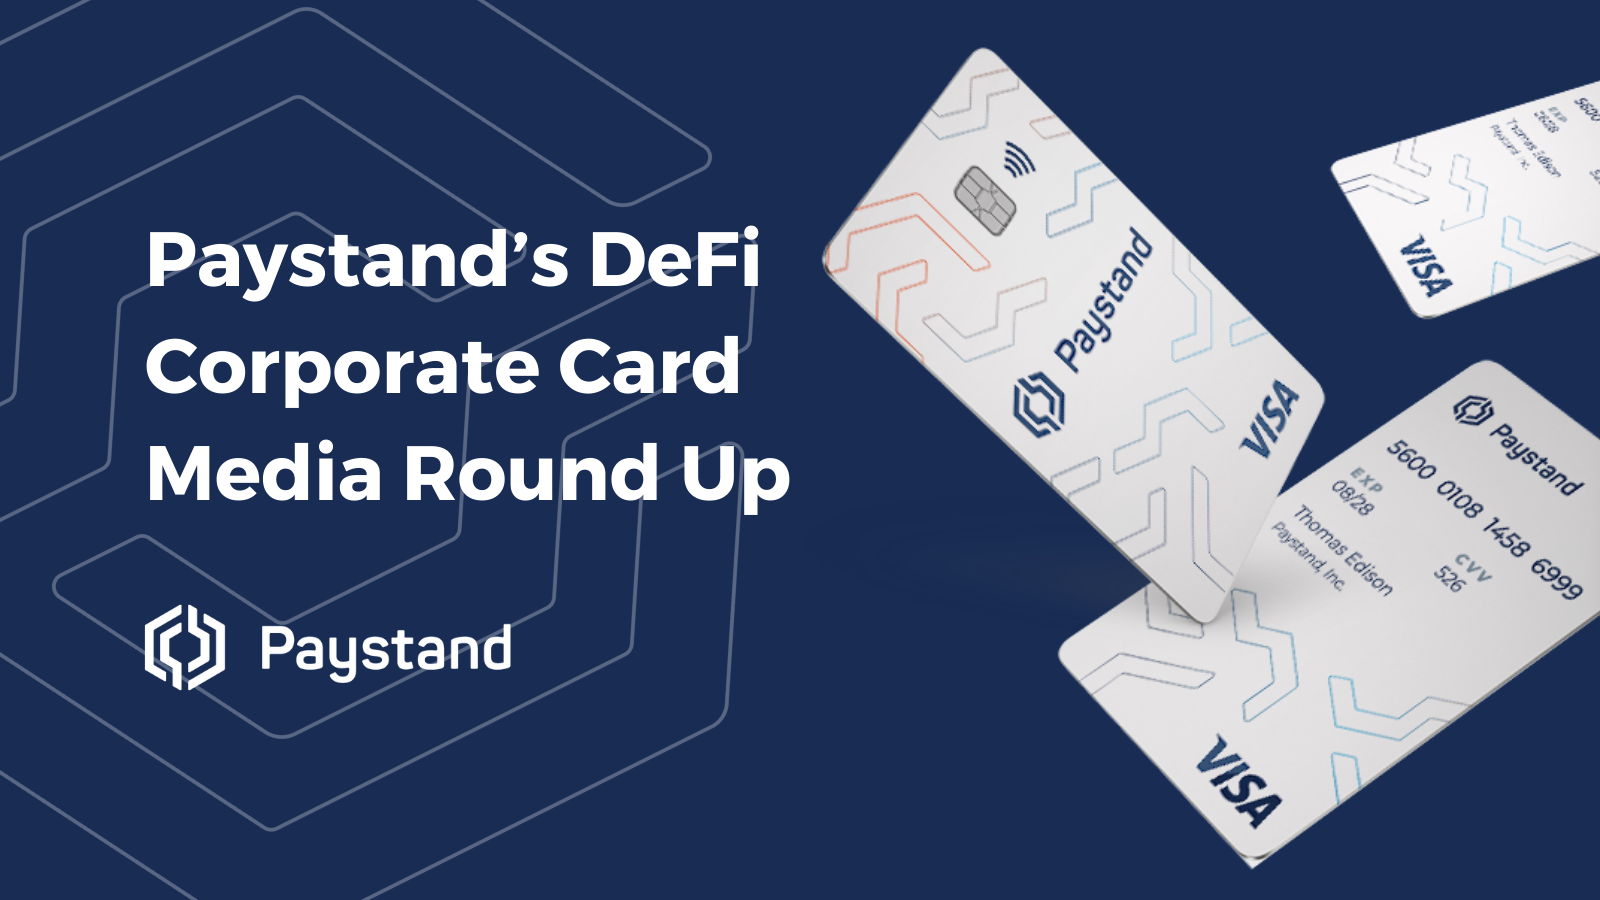 Paystand's DeFi Corporate Card Media Round Up